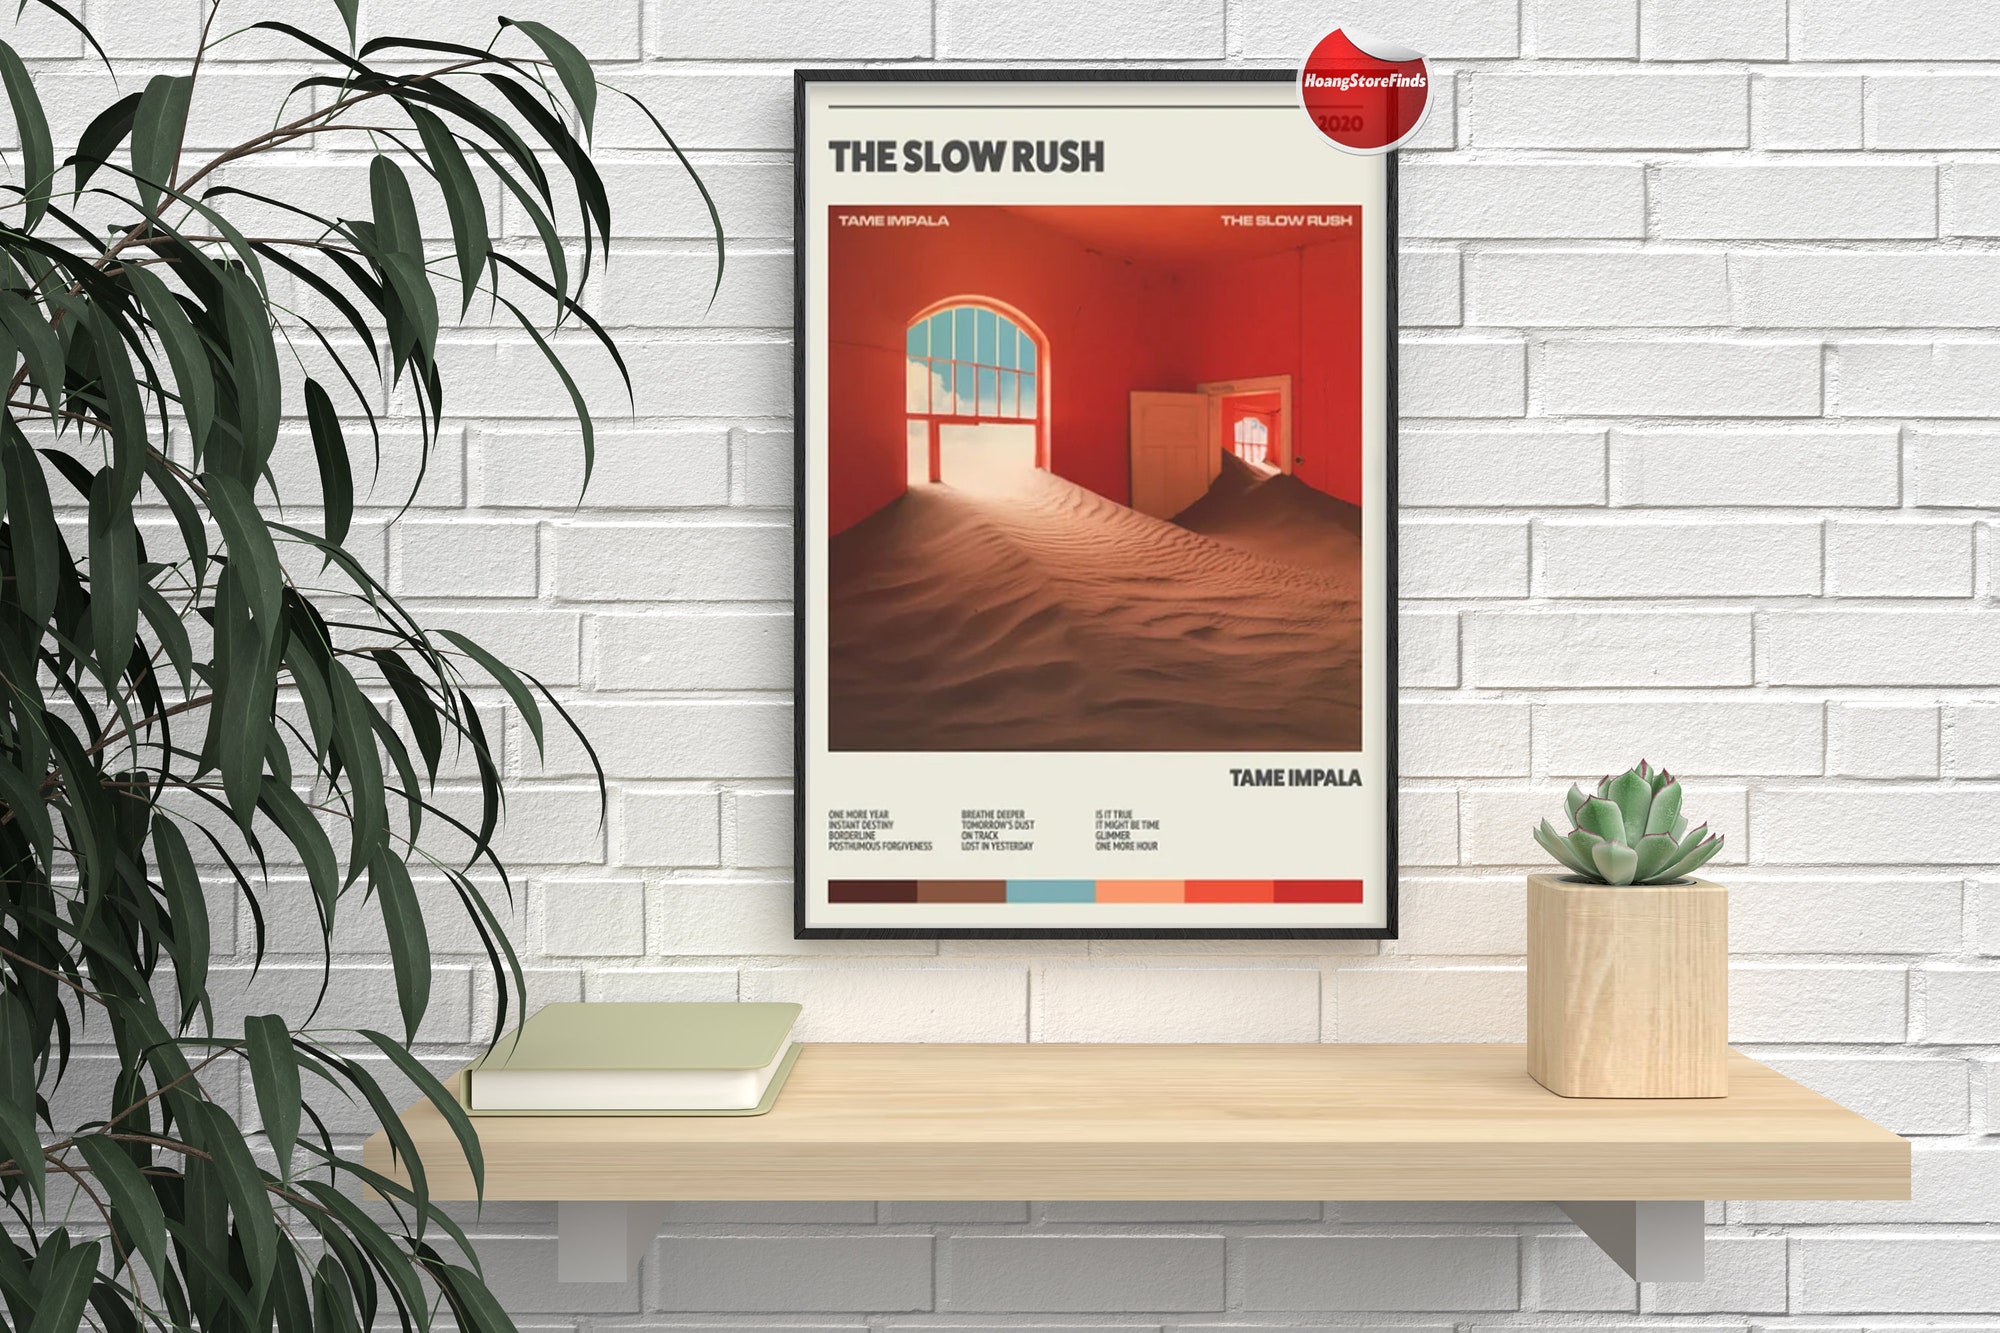 Tame Impala Poster, The Slow Rush Poster, The Slow Rush Album Cover Poster, Album Poster